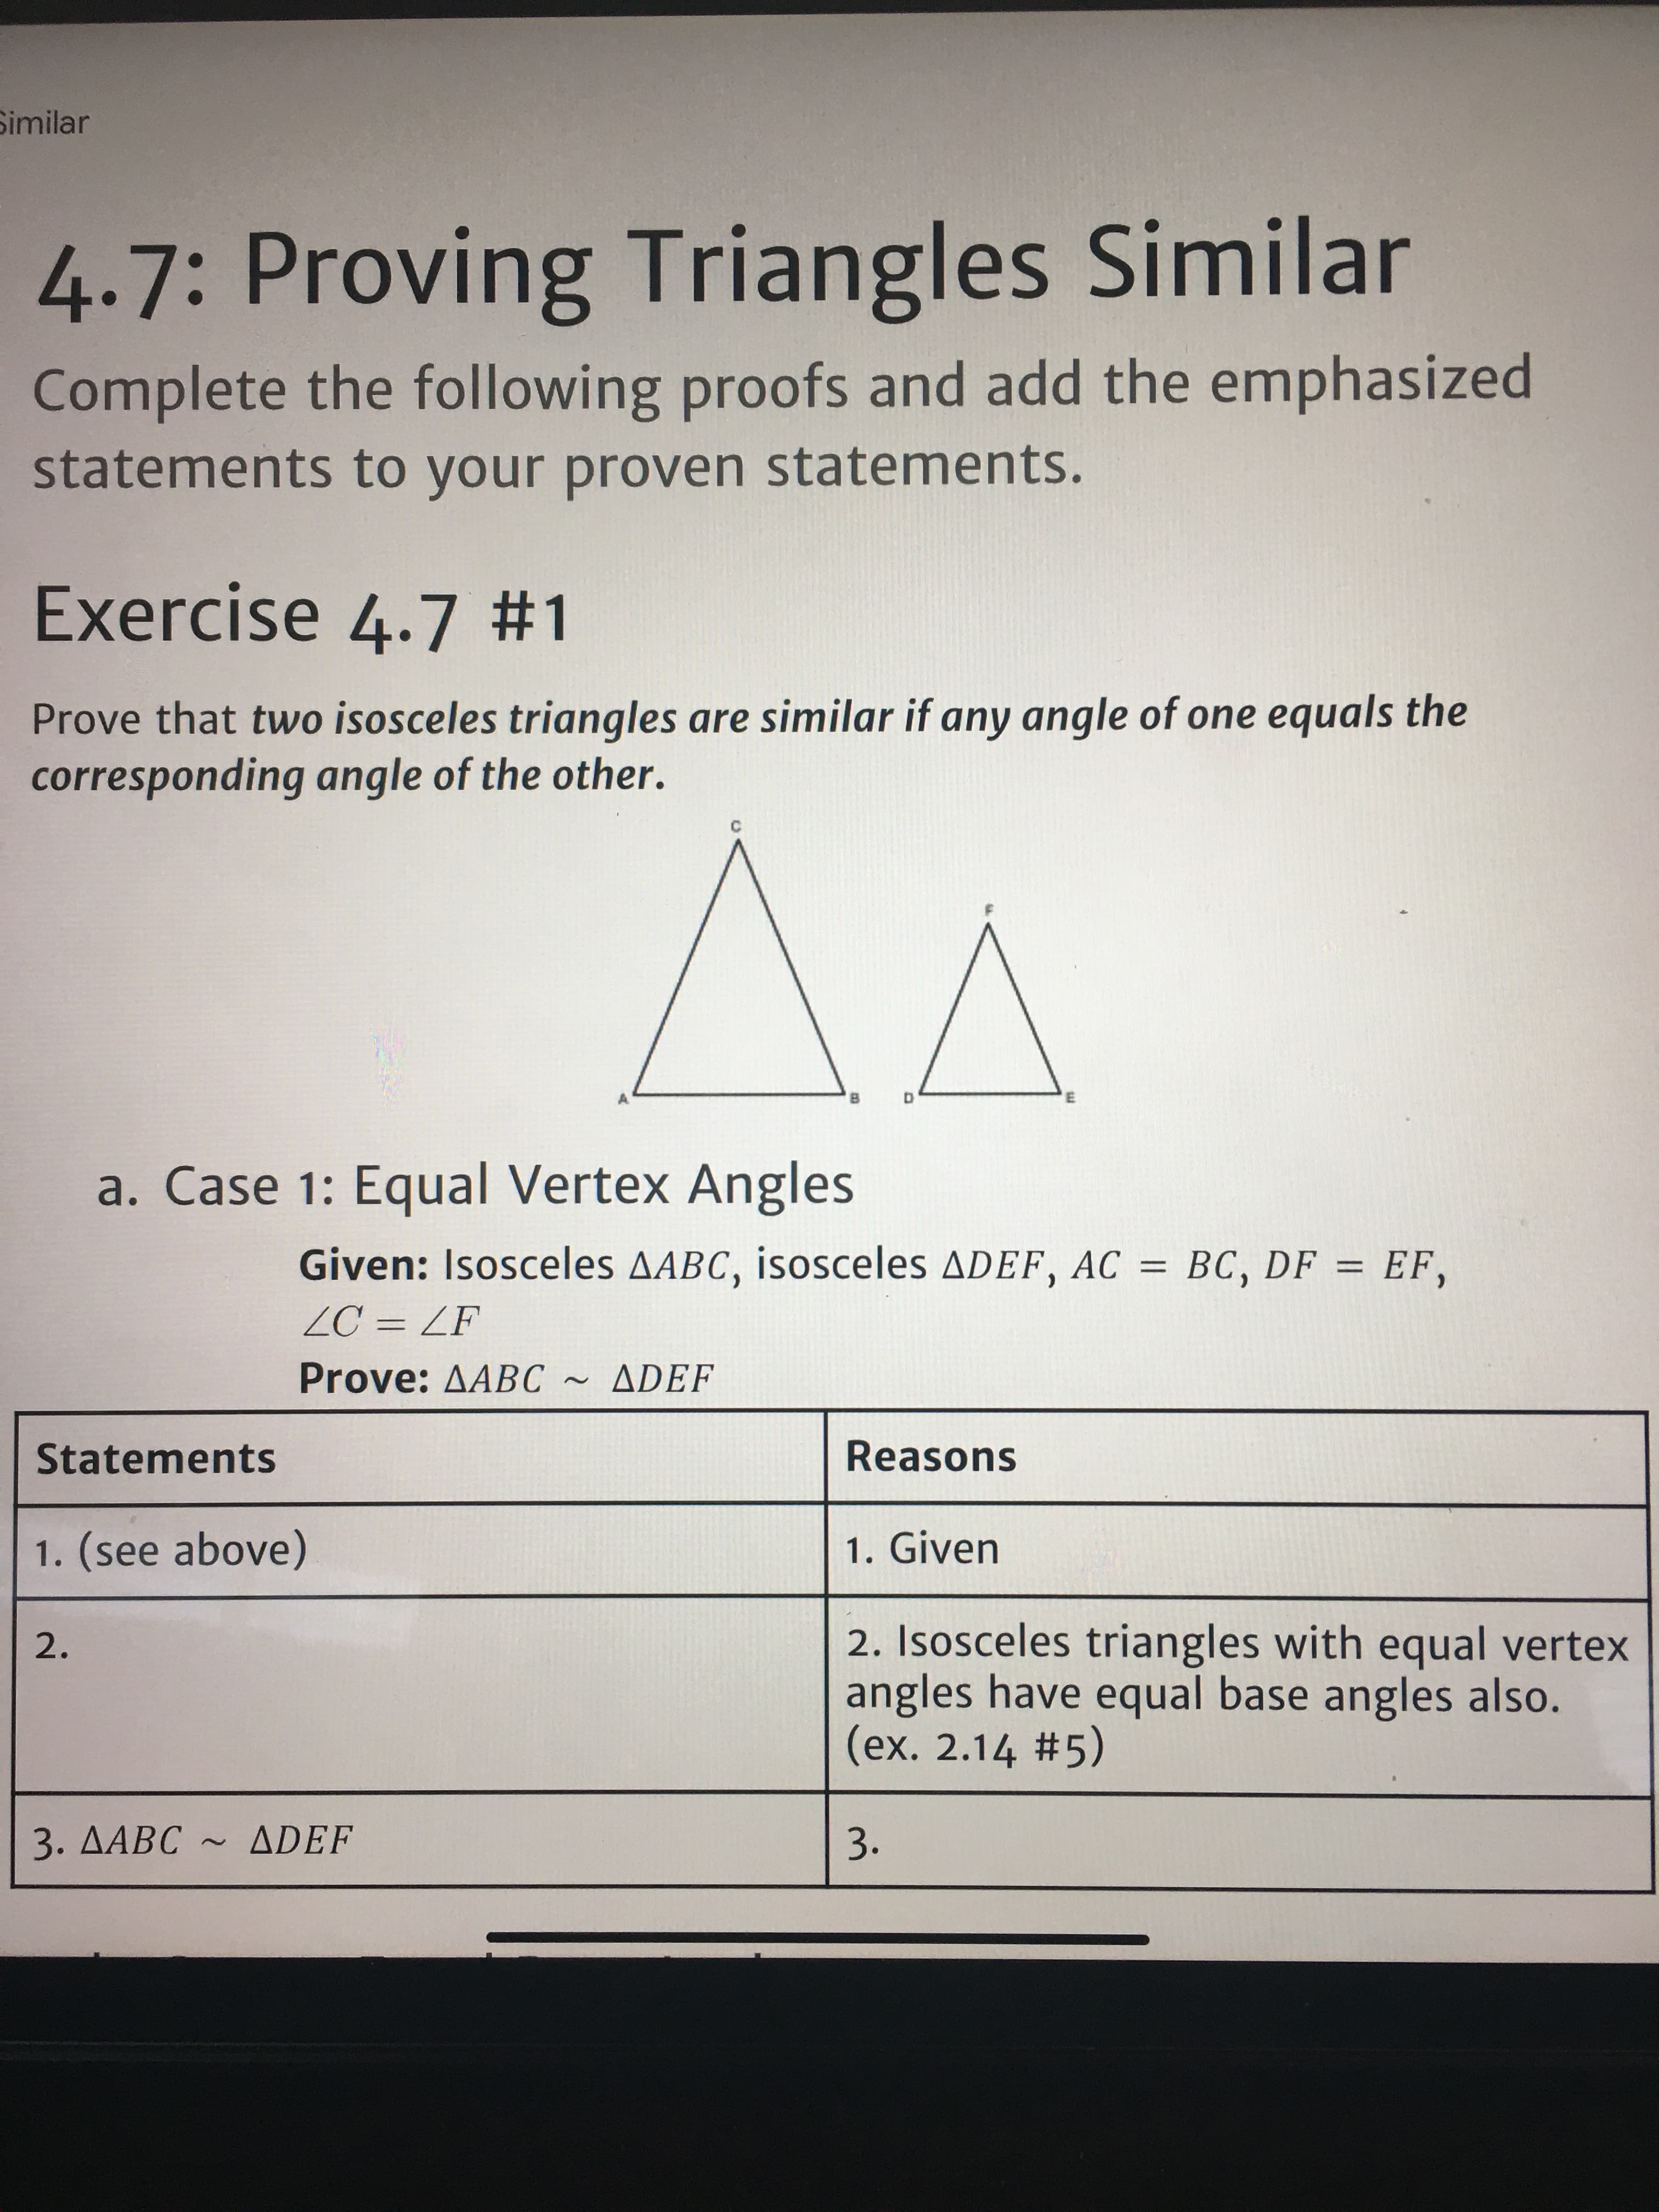 Similar
4.7:Provir
ng Triangles Similar
Complete the following proofs and add the emphasized
statements to your proven statements.
Exercise 4.7 #1
Prove that two isosceles triangles are similar if any angle of one equals the
corresponding angle of the other.
a. Case 1: Equal Vertex Angles
Given: Isosceles AABC, isosceles ADEF, AC = BC, DF = EF,
%3D
ZC = ZF
Prove: AABC
ADEF
Statements
Reasons
1. (see above)
1. Given
2. Isosceles triangles with equal vertex
angles have equal base angles also.
(ex. 2.14 #5)
2.
3. AABC ~ ADEF
3.
